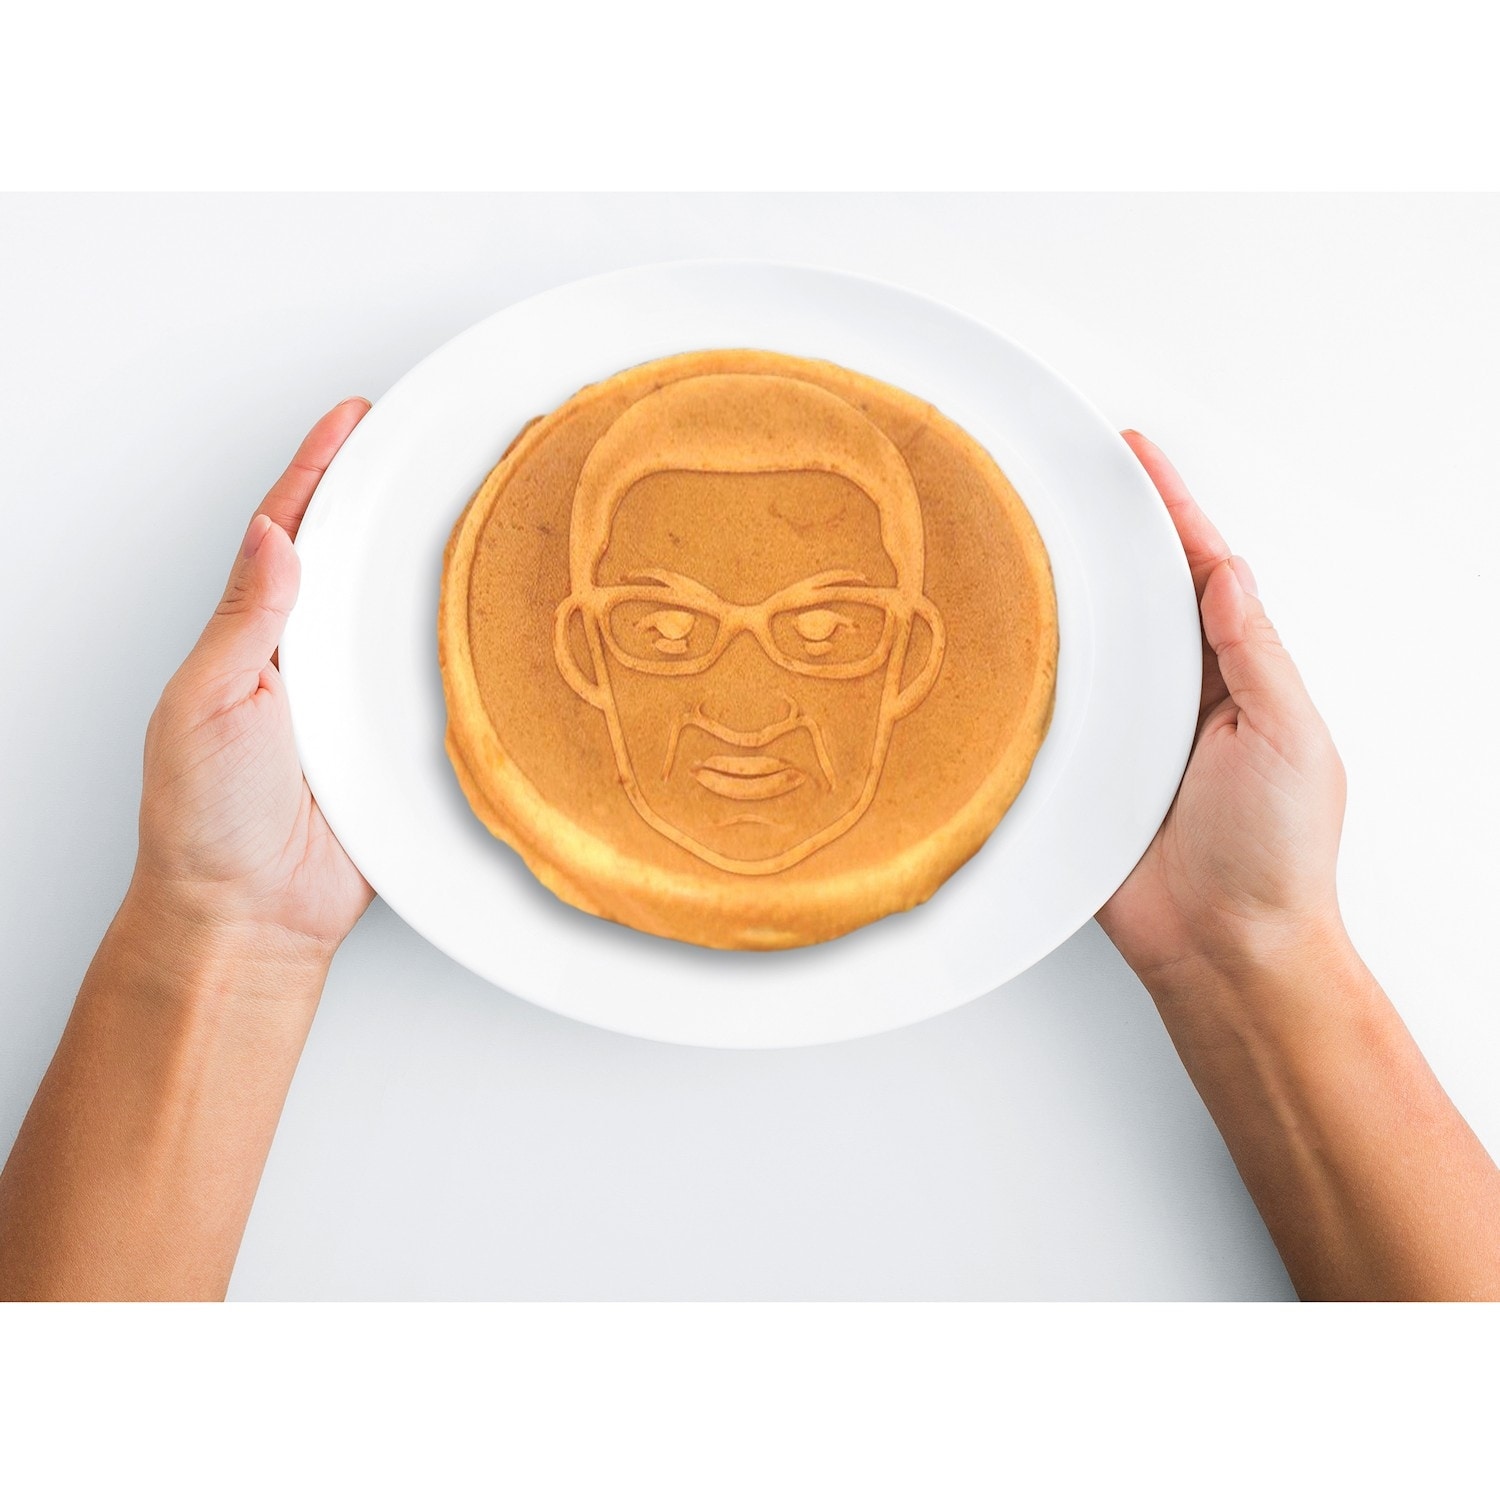 https://ak1.ostkcdn.com/images/products/is/images/direct/378edef8b2dc33230b3a8dace18b8103fa0da5bd/Ruth-Bader-Ginsburg-Waffle-Maker%2C-RBG%27s-Face-on-a-Waffle-Pancake%2C-Waffle-Iron.jpg